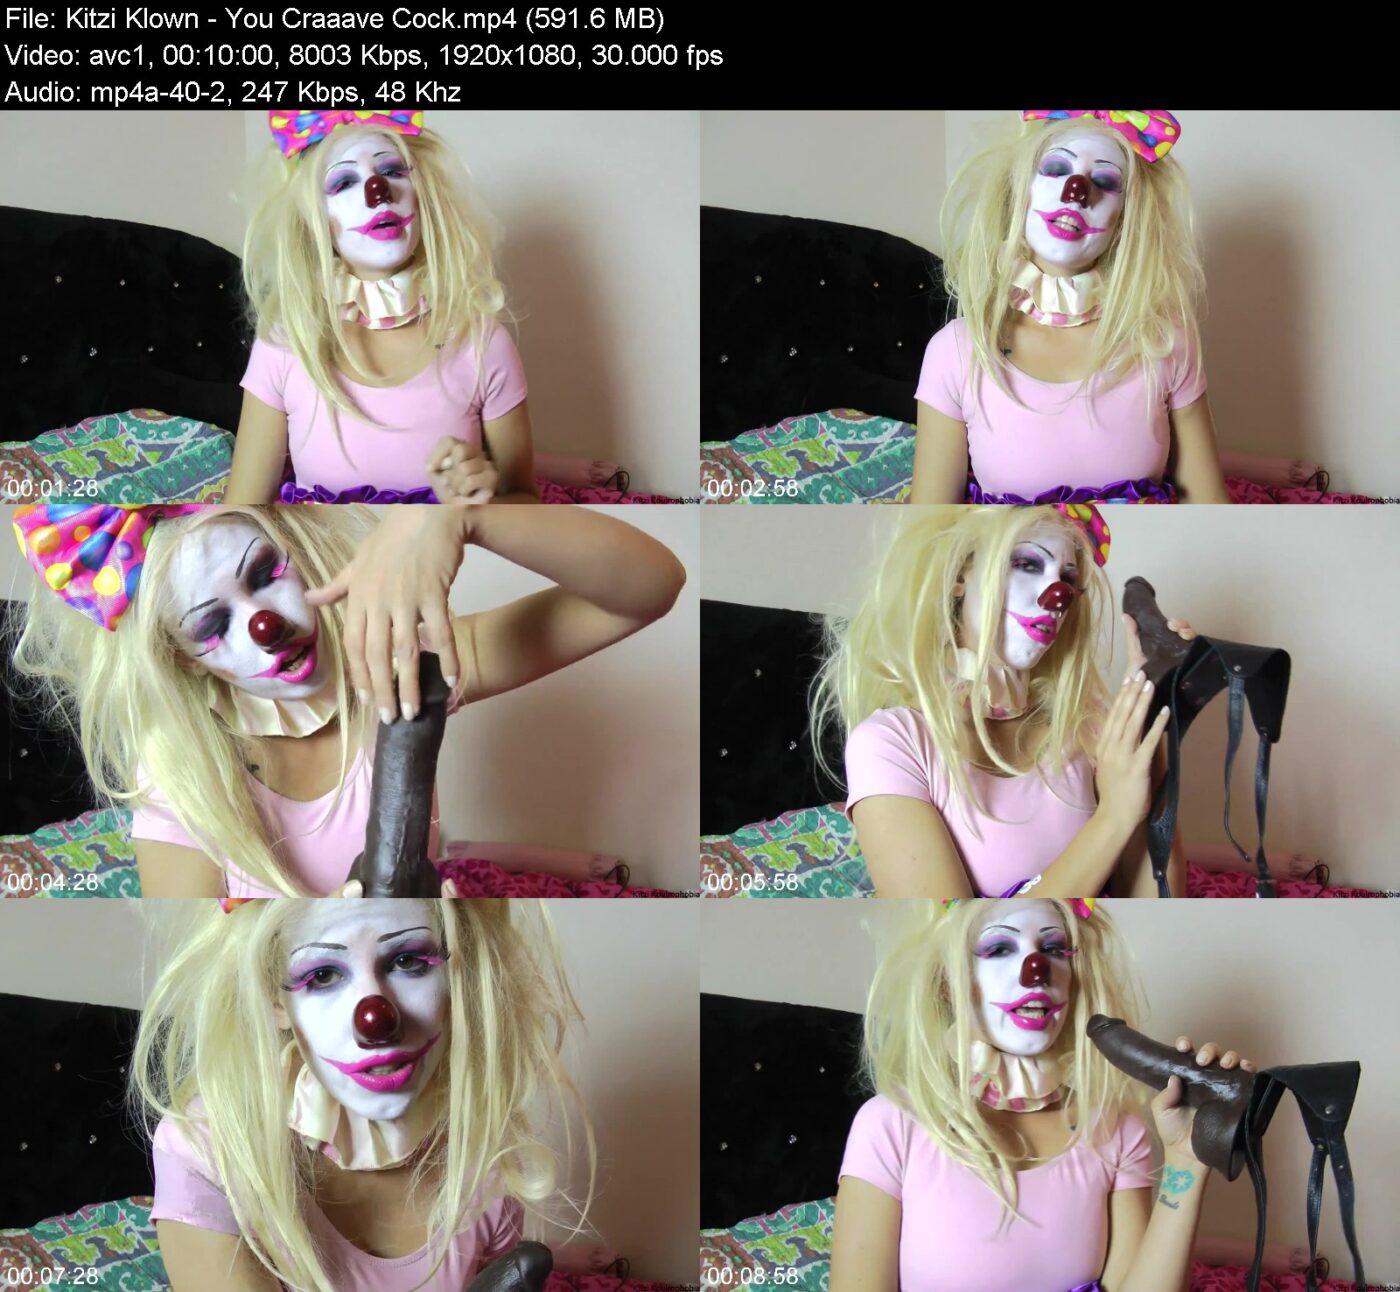 Kitzi Klown in You Craaave Cock